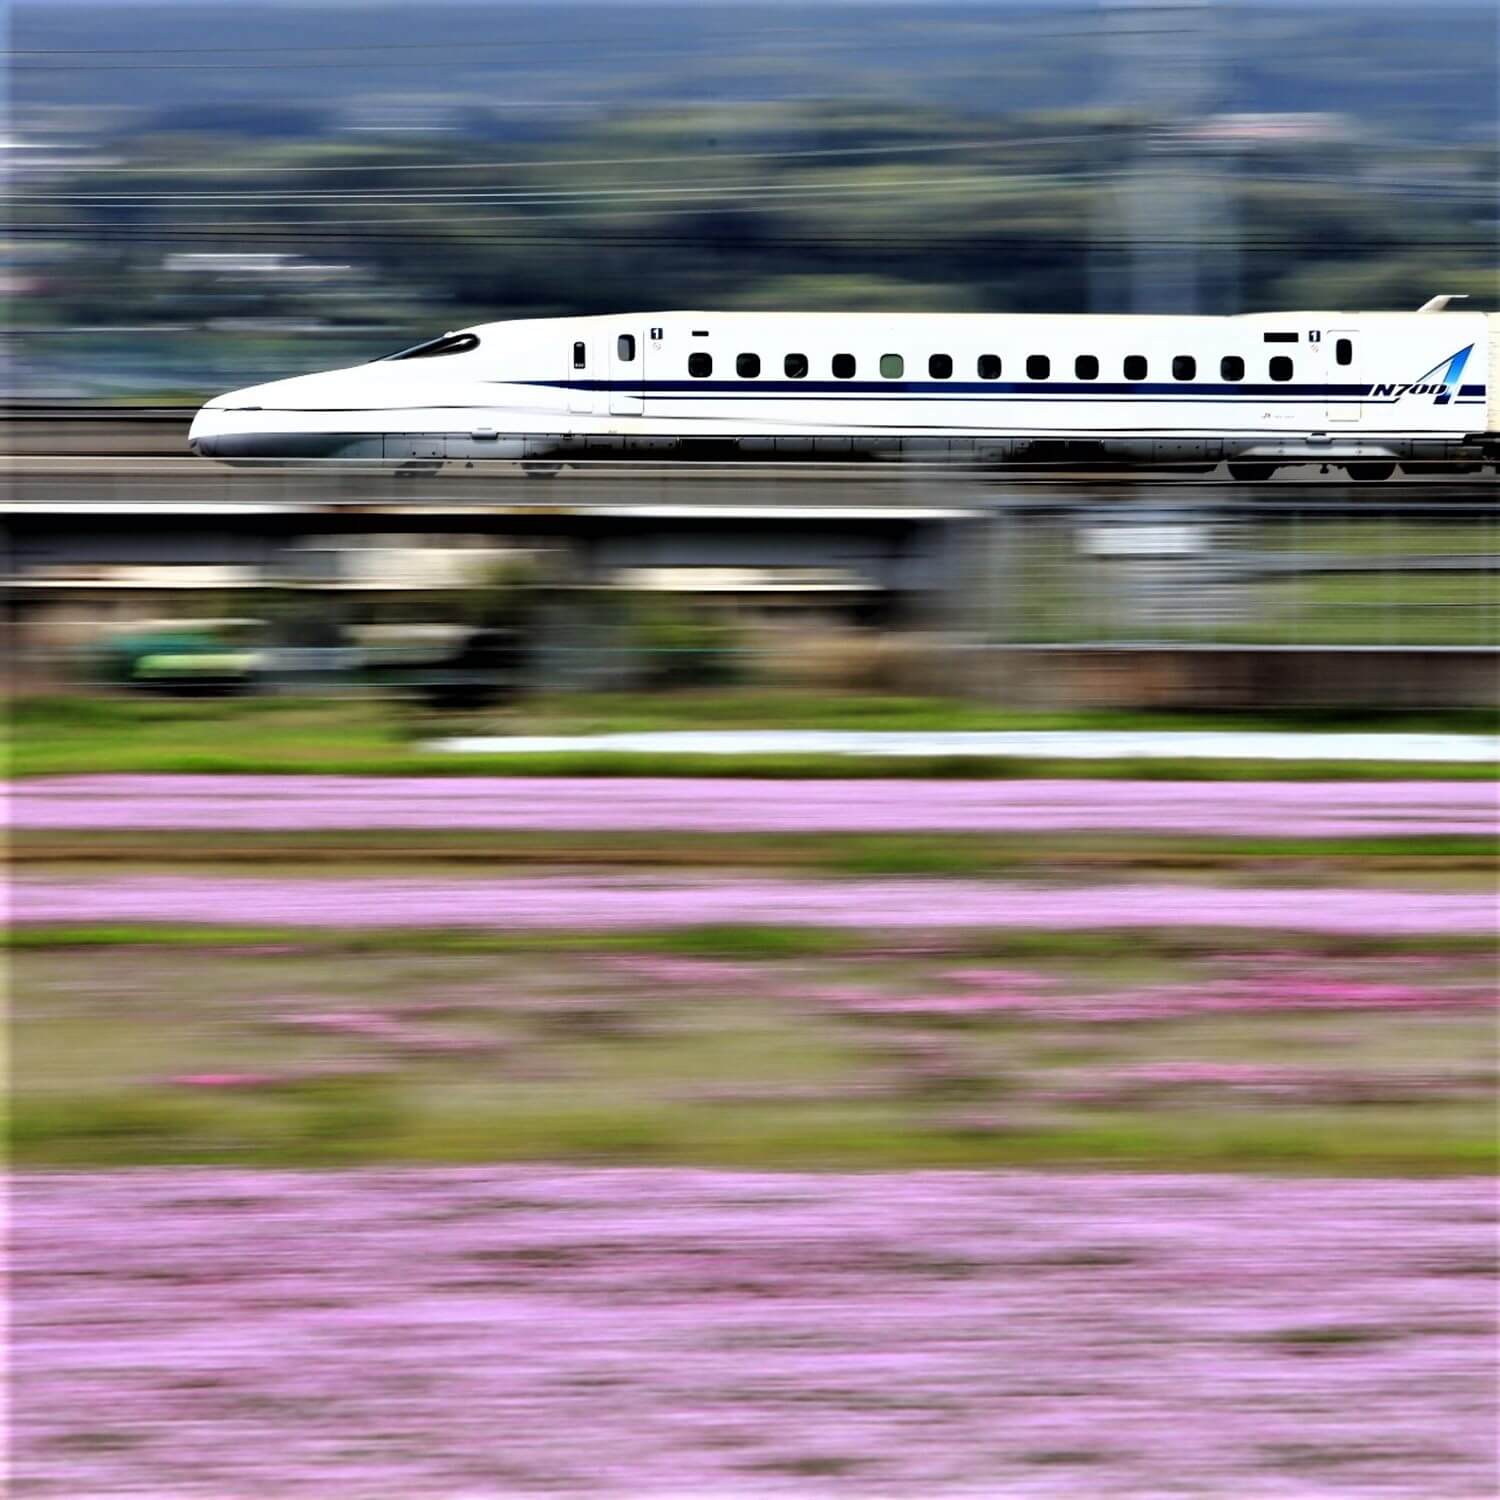 The Shinkansen connects various parts of Japan in accurate time 4